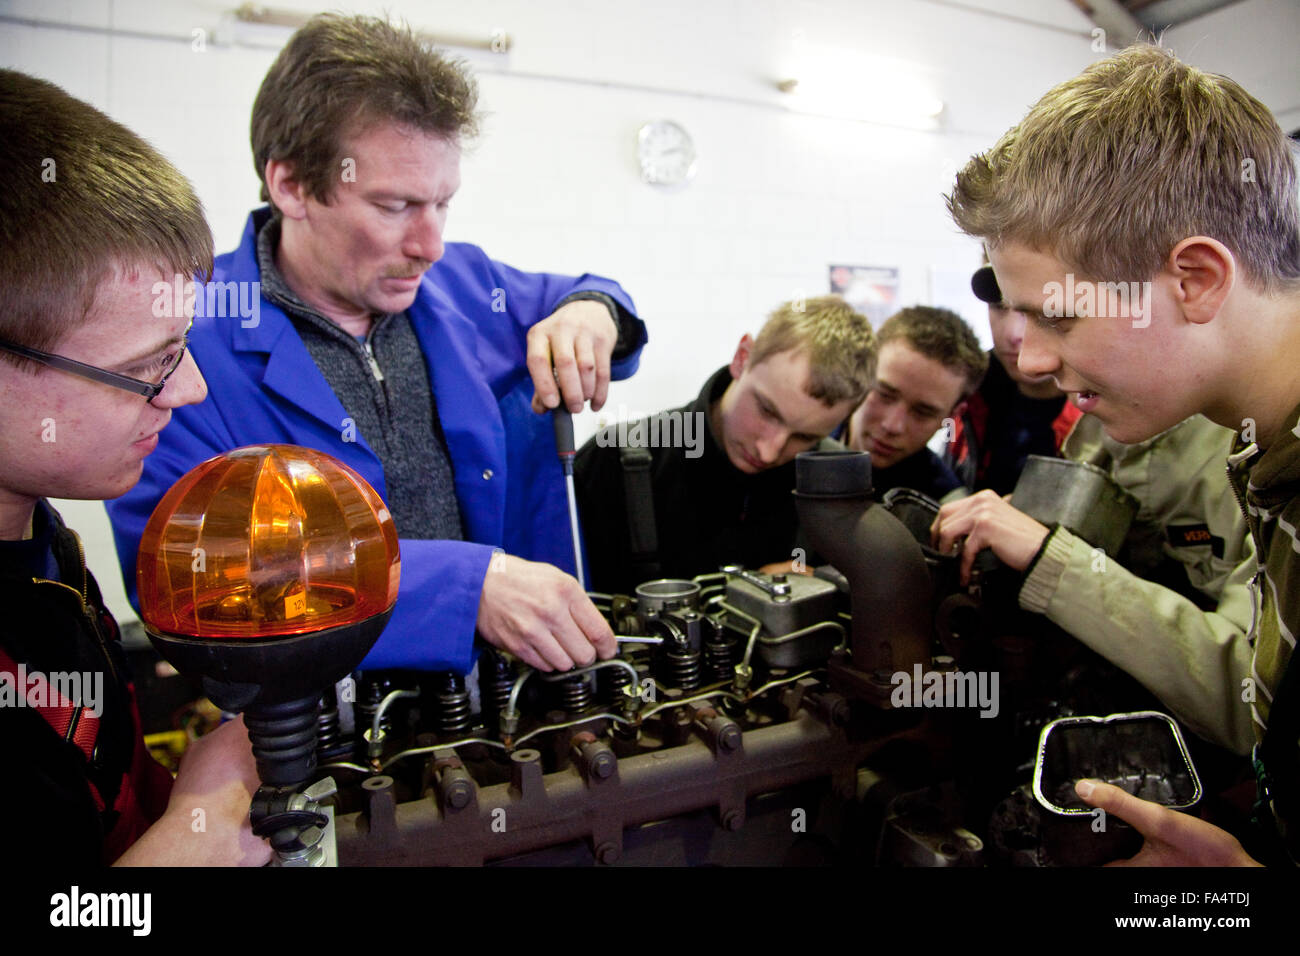 Practical education at a tractor. Master explains the engine of an agricultural machinery. Stock Photo